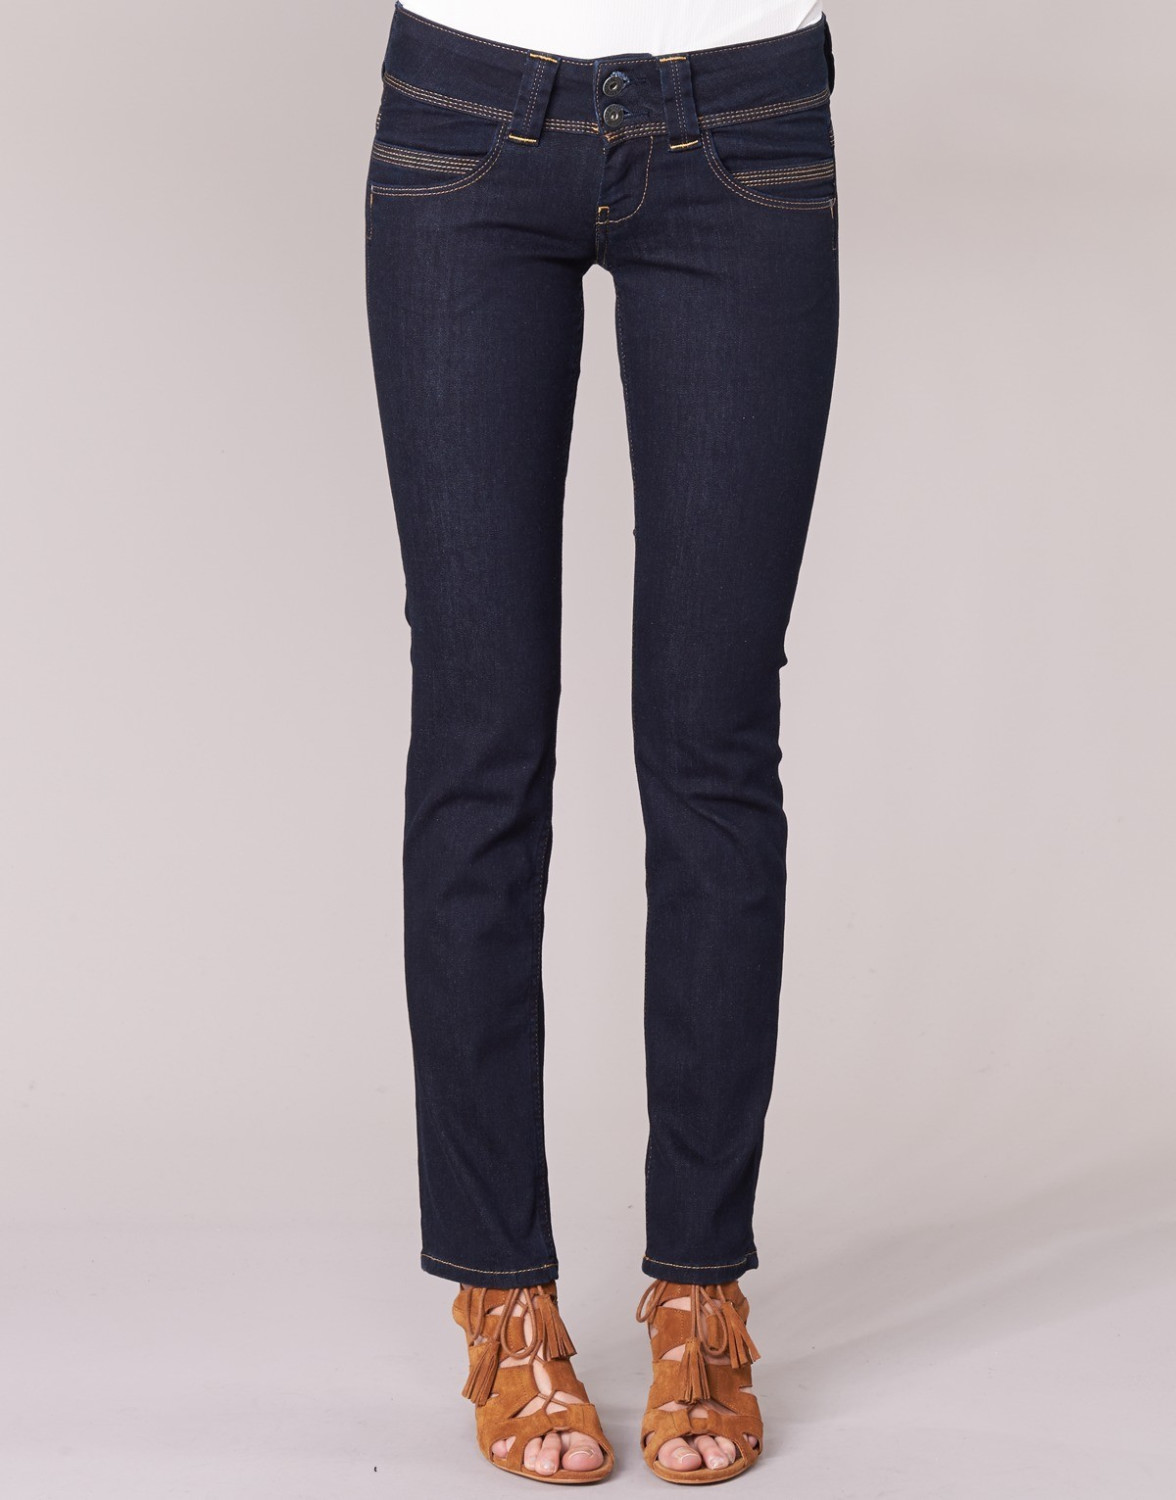 Buy Pepe Jeans Venus (PL200029M152) from £42.44 (Today) – Best Deals on ...